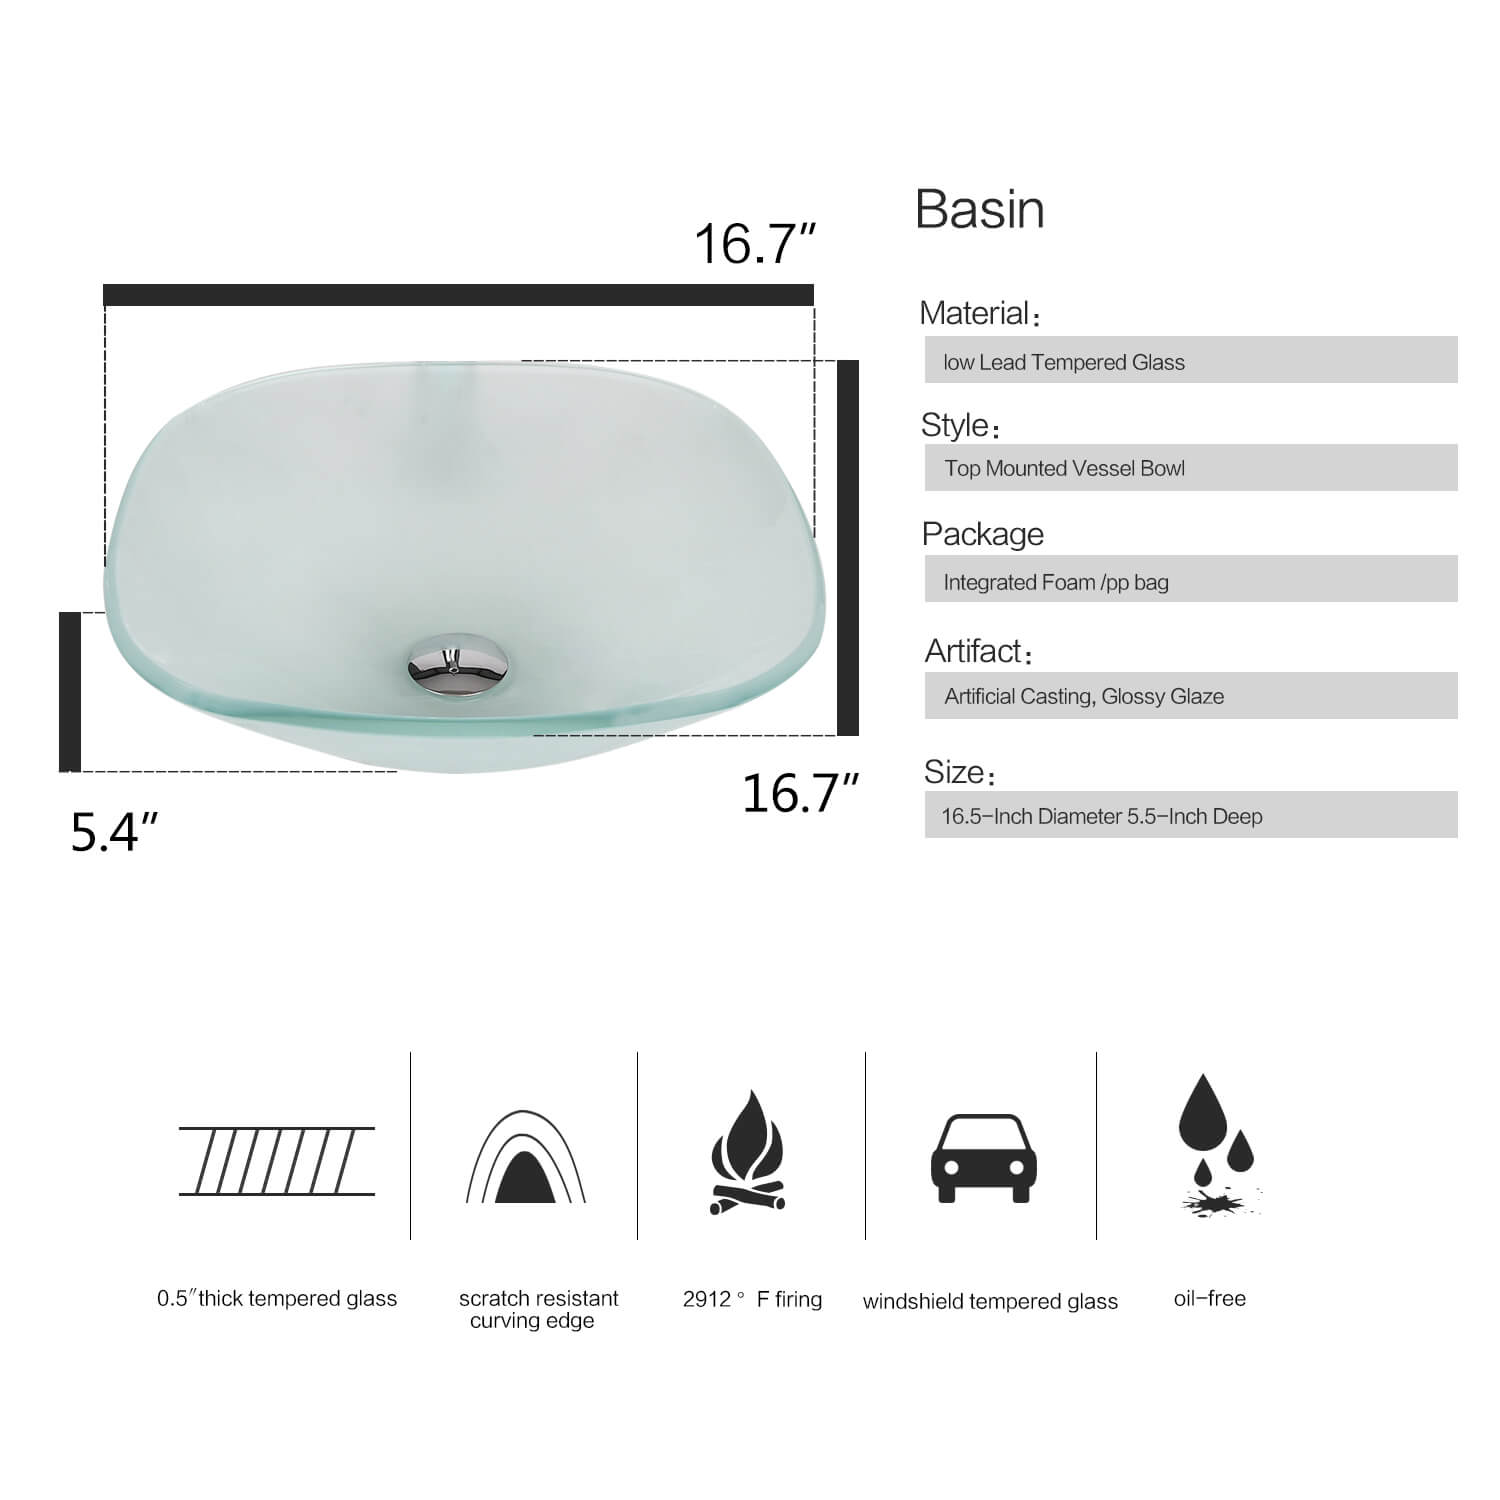 Elecwish Square Frosted Sink basin size and descriptions